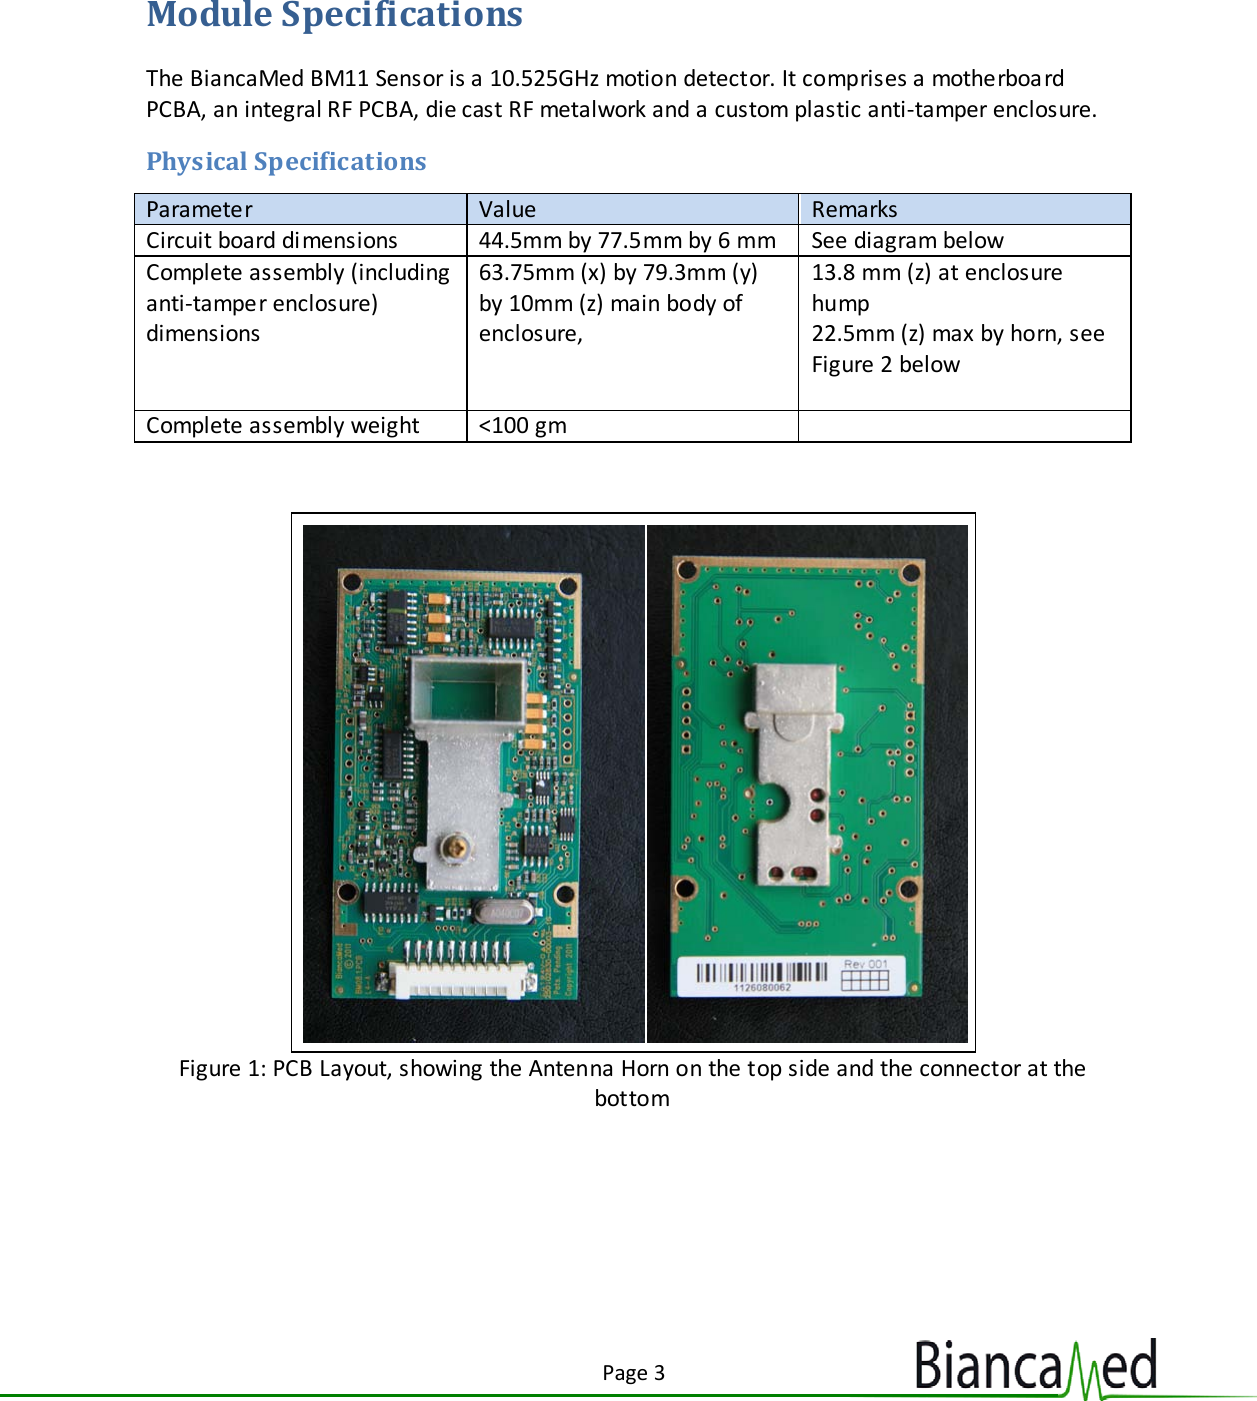 Page 3  Module Specifications The BiancaMed BM11 Sensor is a 10.525GHz motion detector. It comprises a motherboa rd PCBA, an integral RF PCBA, die cast RF metalwork and a custom plastic anti-tamper enclosure. Physical Specifications Parameter Value Remarks Circuit board dimensions 44.5mm by 77.5mm by 6 mm See diagram below Complete assembly (including anti-tamper enclosure) dimensions 63.75mm (x) by 79.3mm (y) by 10mm (z) main body of enclosure,   13.8 mm (z) at enclosure hump 22.5mm (z) max by horn, see Figure 2 below  Complete assembly weight &lt;100 gm    Figure 1: PCB Layout, showing the Antenna Horn on the top side and the connector at the bottom   